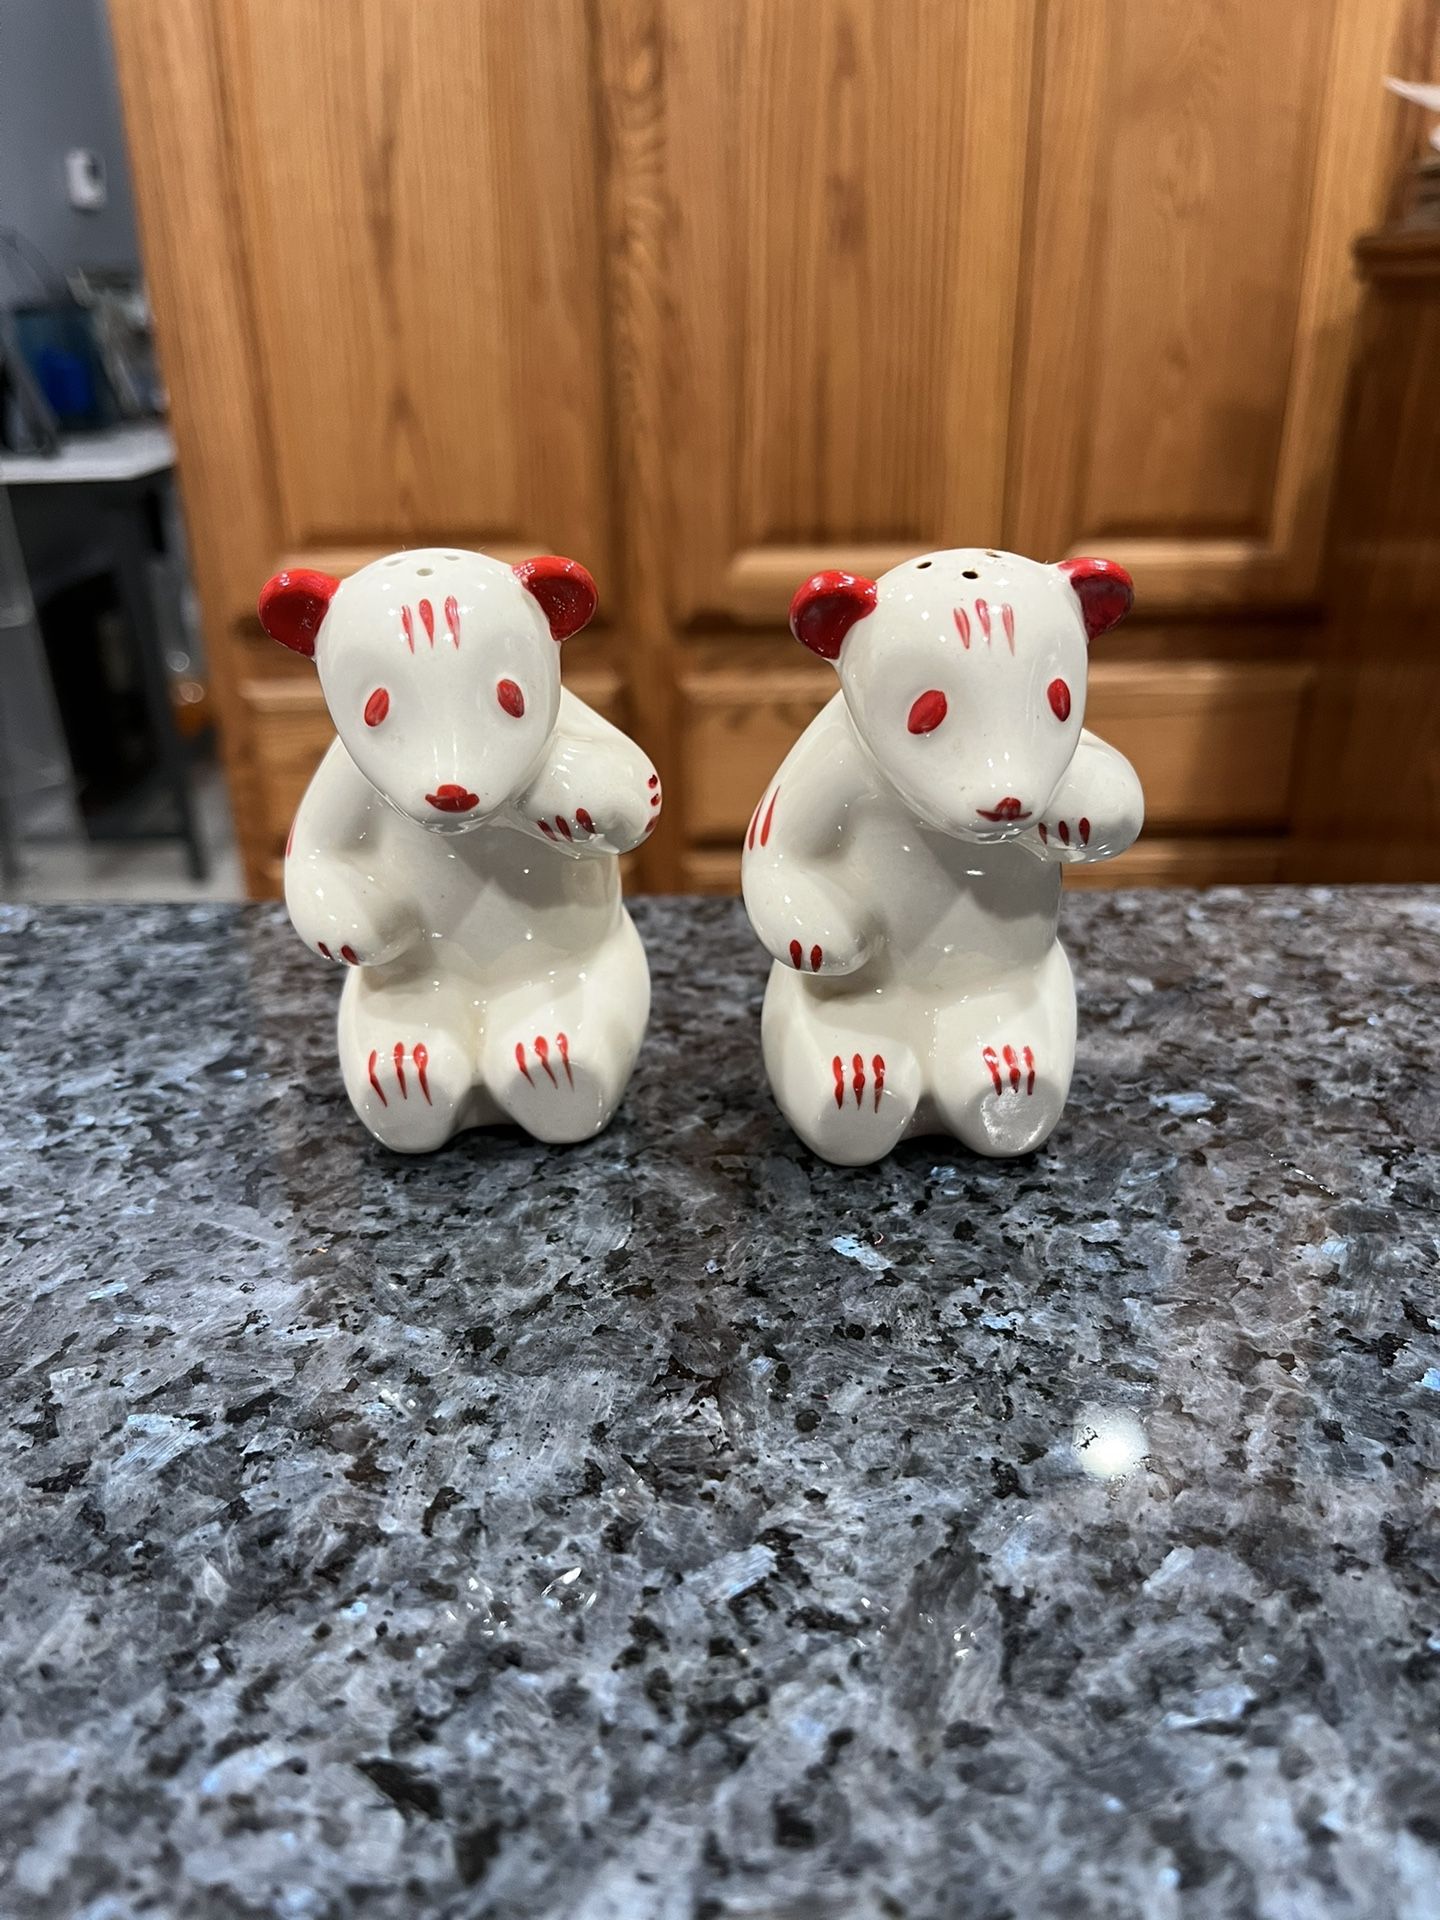 Vintages Bears 1940’s Glazed Ceramic Pair Of Salt And Pepper Shakers.  Preowned No Stoppers.  Size 3 1/2 Inches Tall 